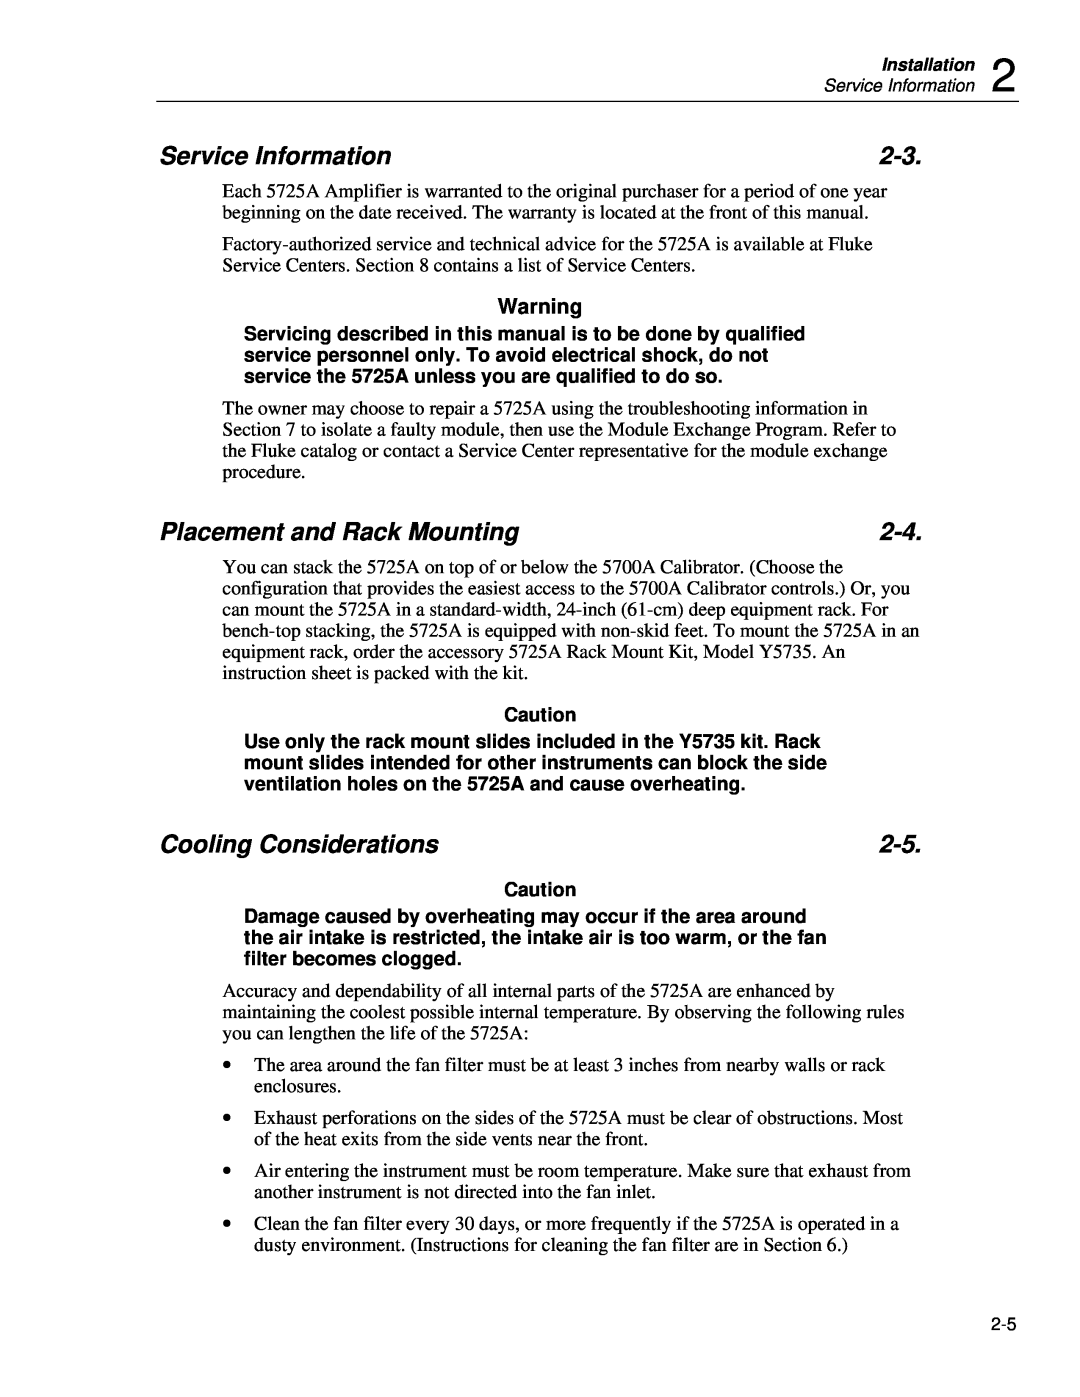 Fluke 5725A instruction manual Service Information, Placement and Rack Mounting, Cooling Considerations 